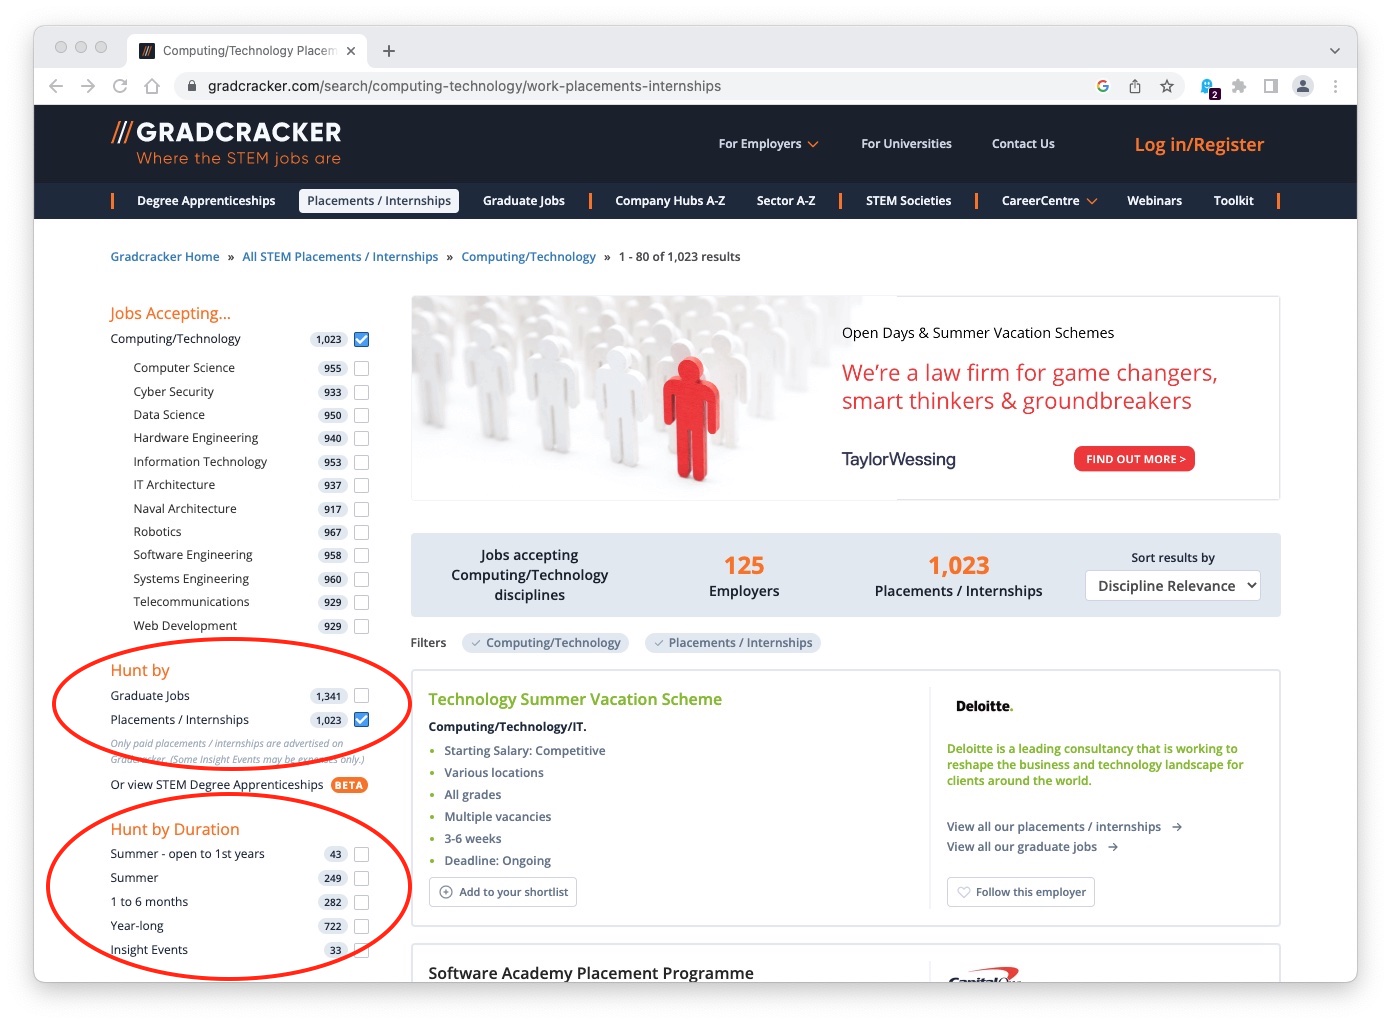 Gradcracker.com allows you to search for opportunities in Computing at gradcracker.com/search/computing-technology/jobs shown here. You can refine your search for internships, placements and graduate jobs (circled in red) by their duration: Summer (including those open to first year students), 1 to 6 months, Year-long and Insight Events described in section 7.3. You may need to zoom in to see the detail in this figure.